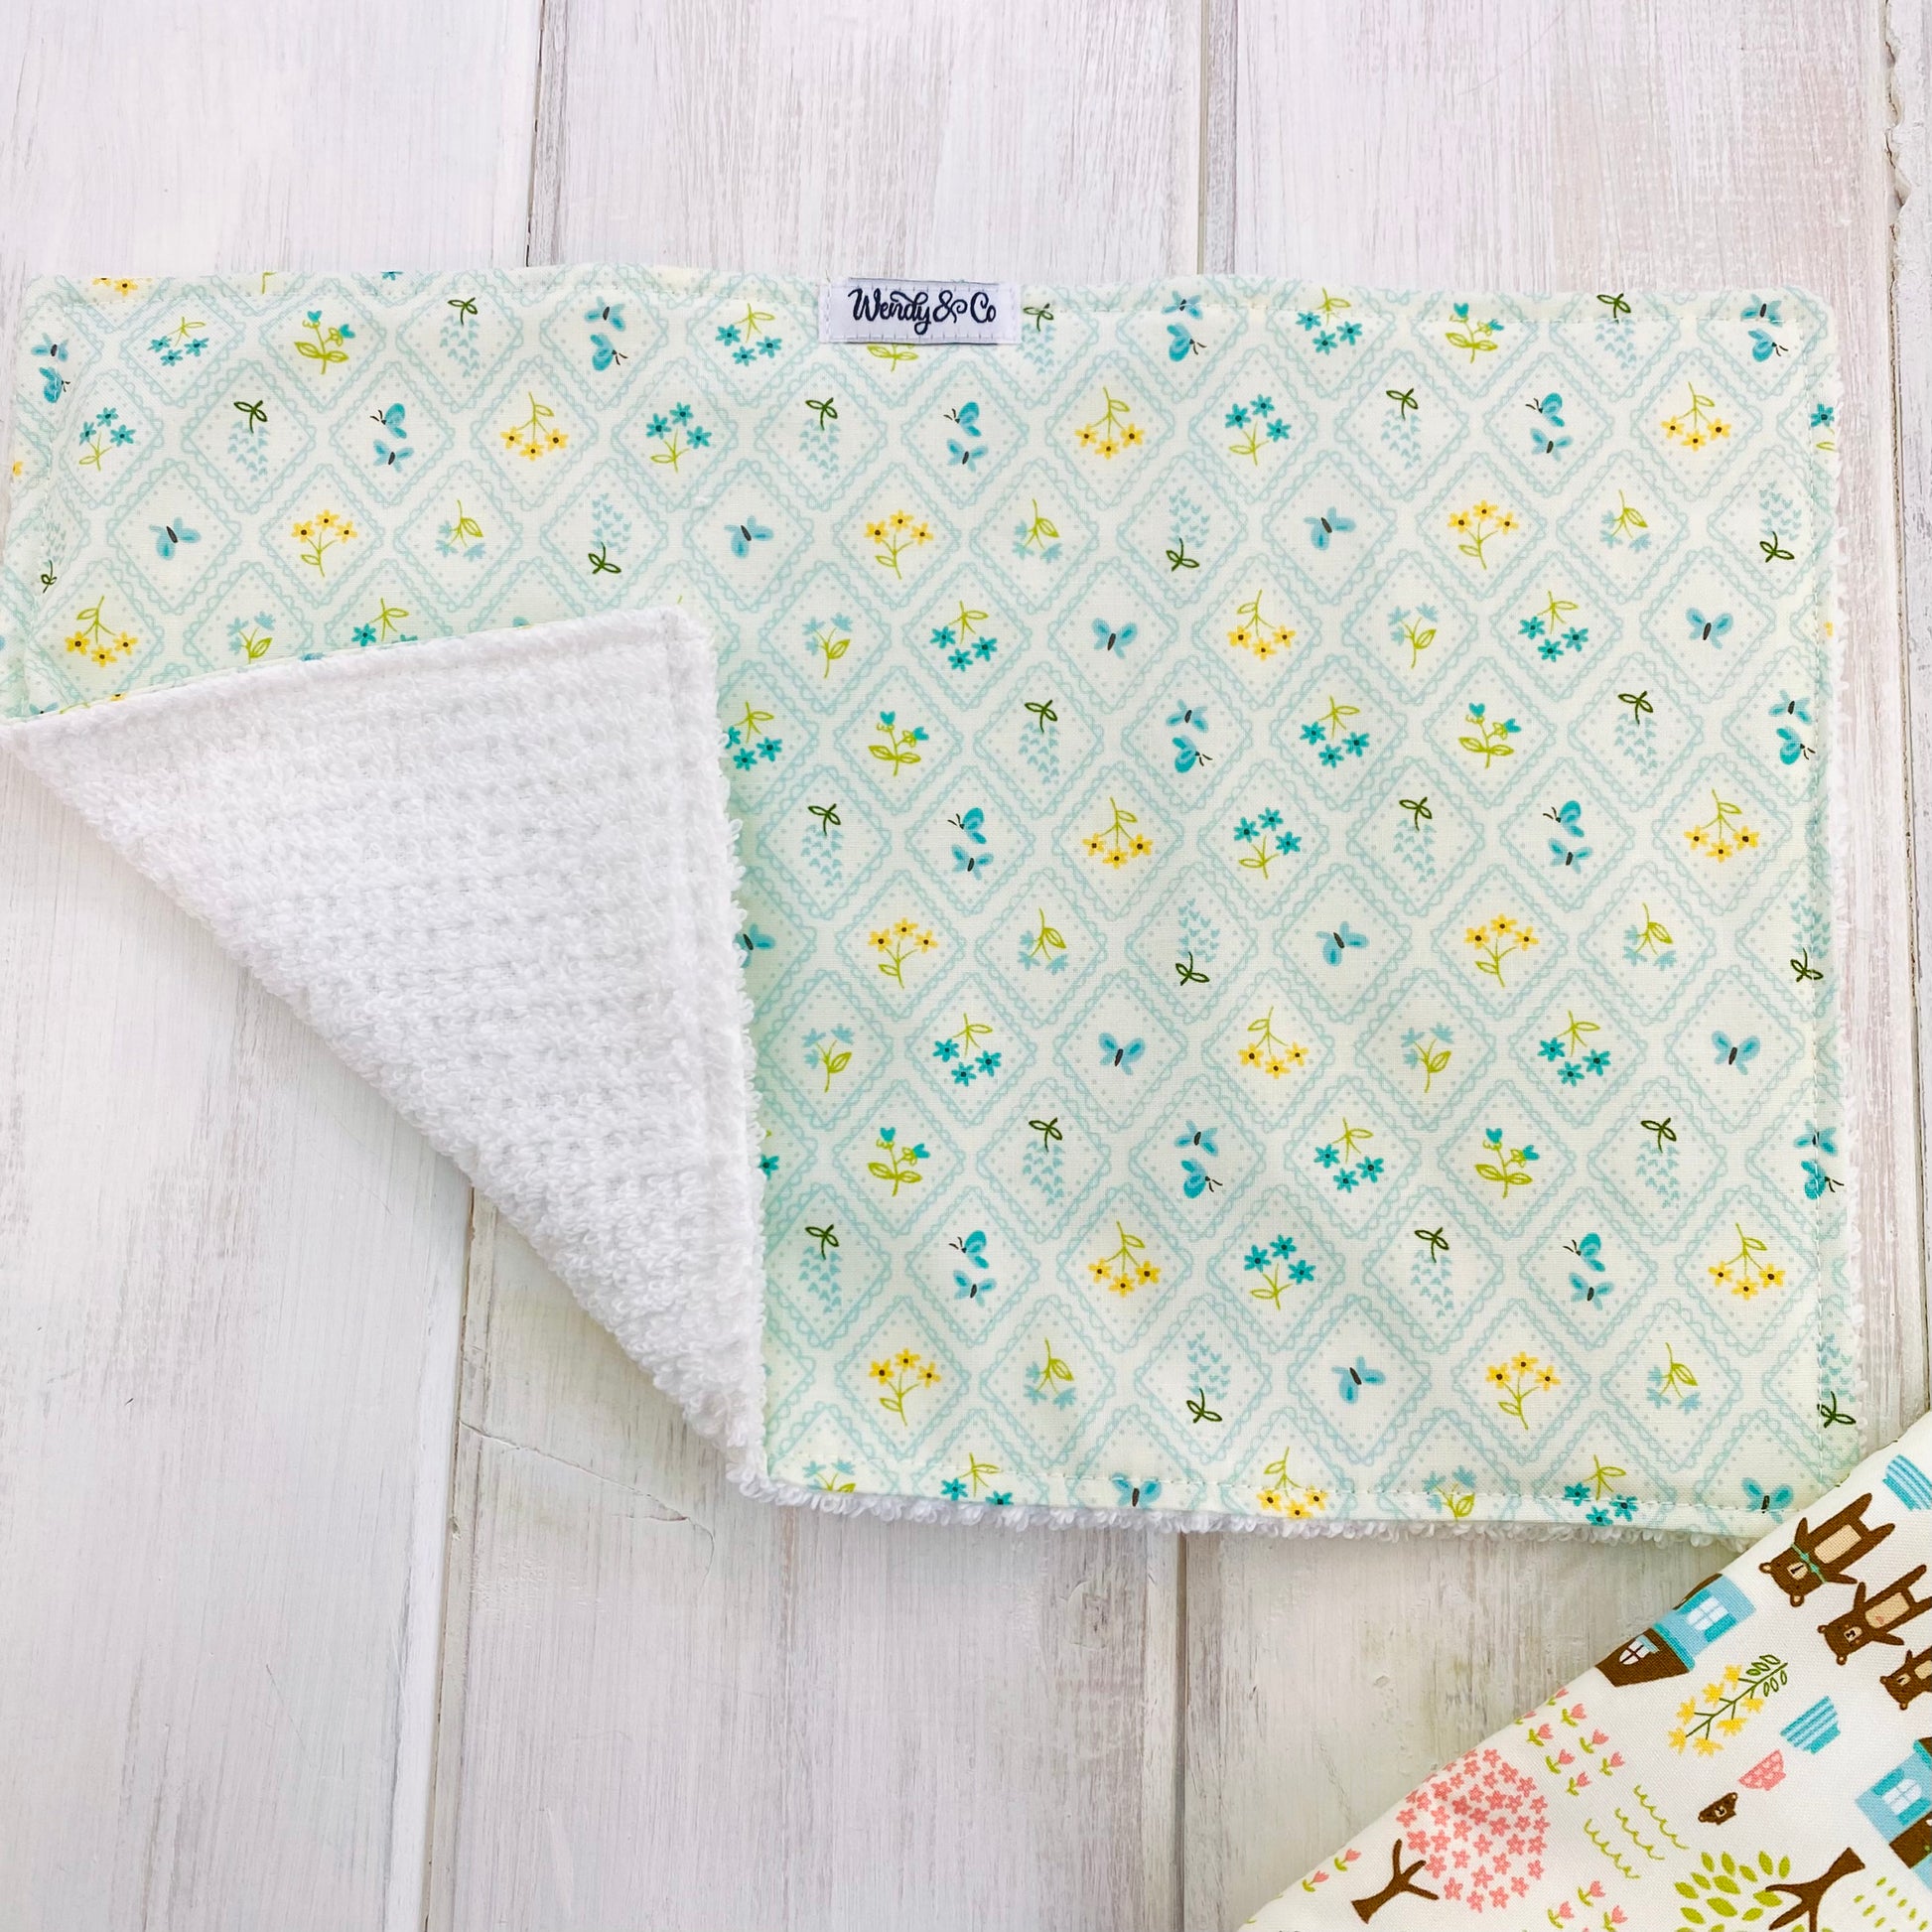 Baby burp cloth in light blue floral with Black-eyed Susan, blue Lupins, and butterflies